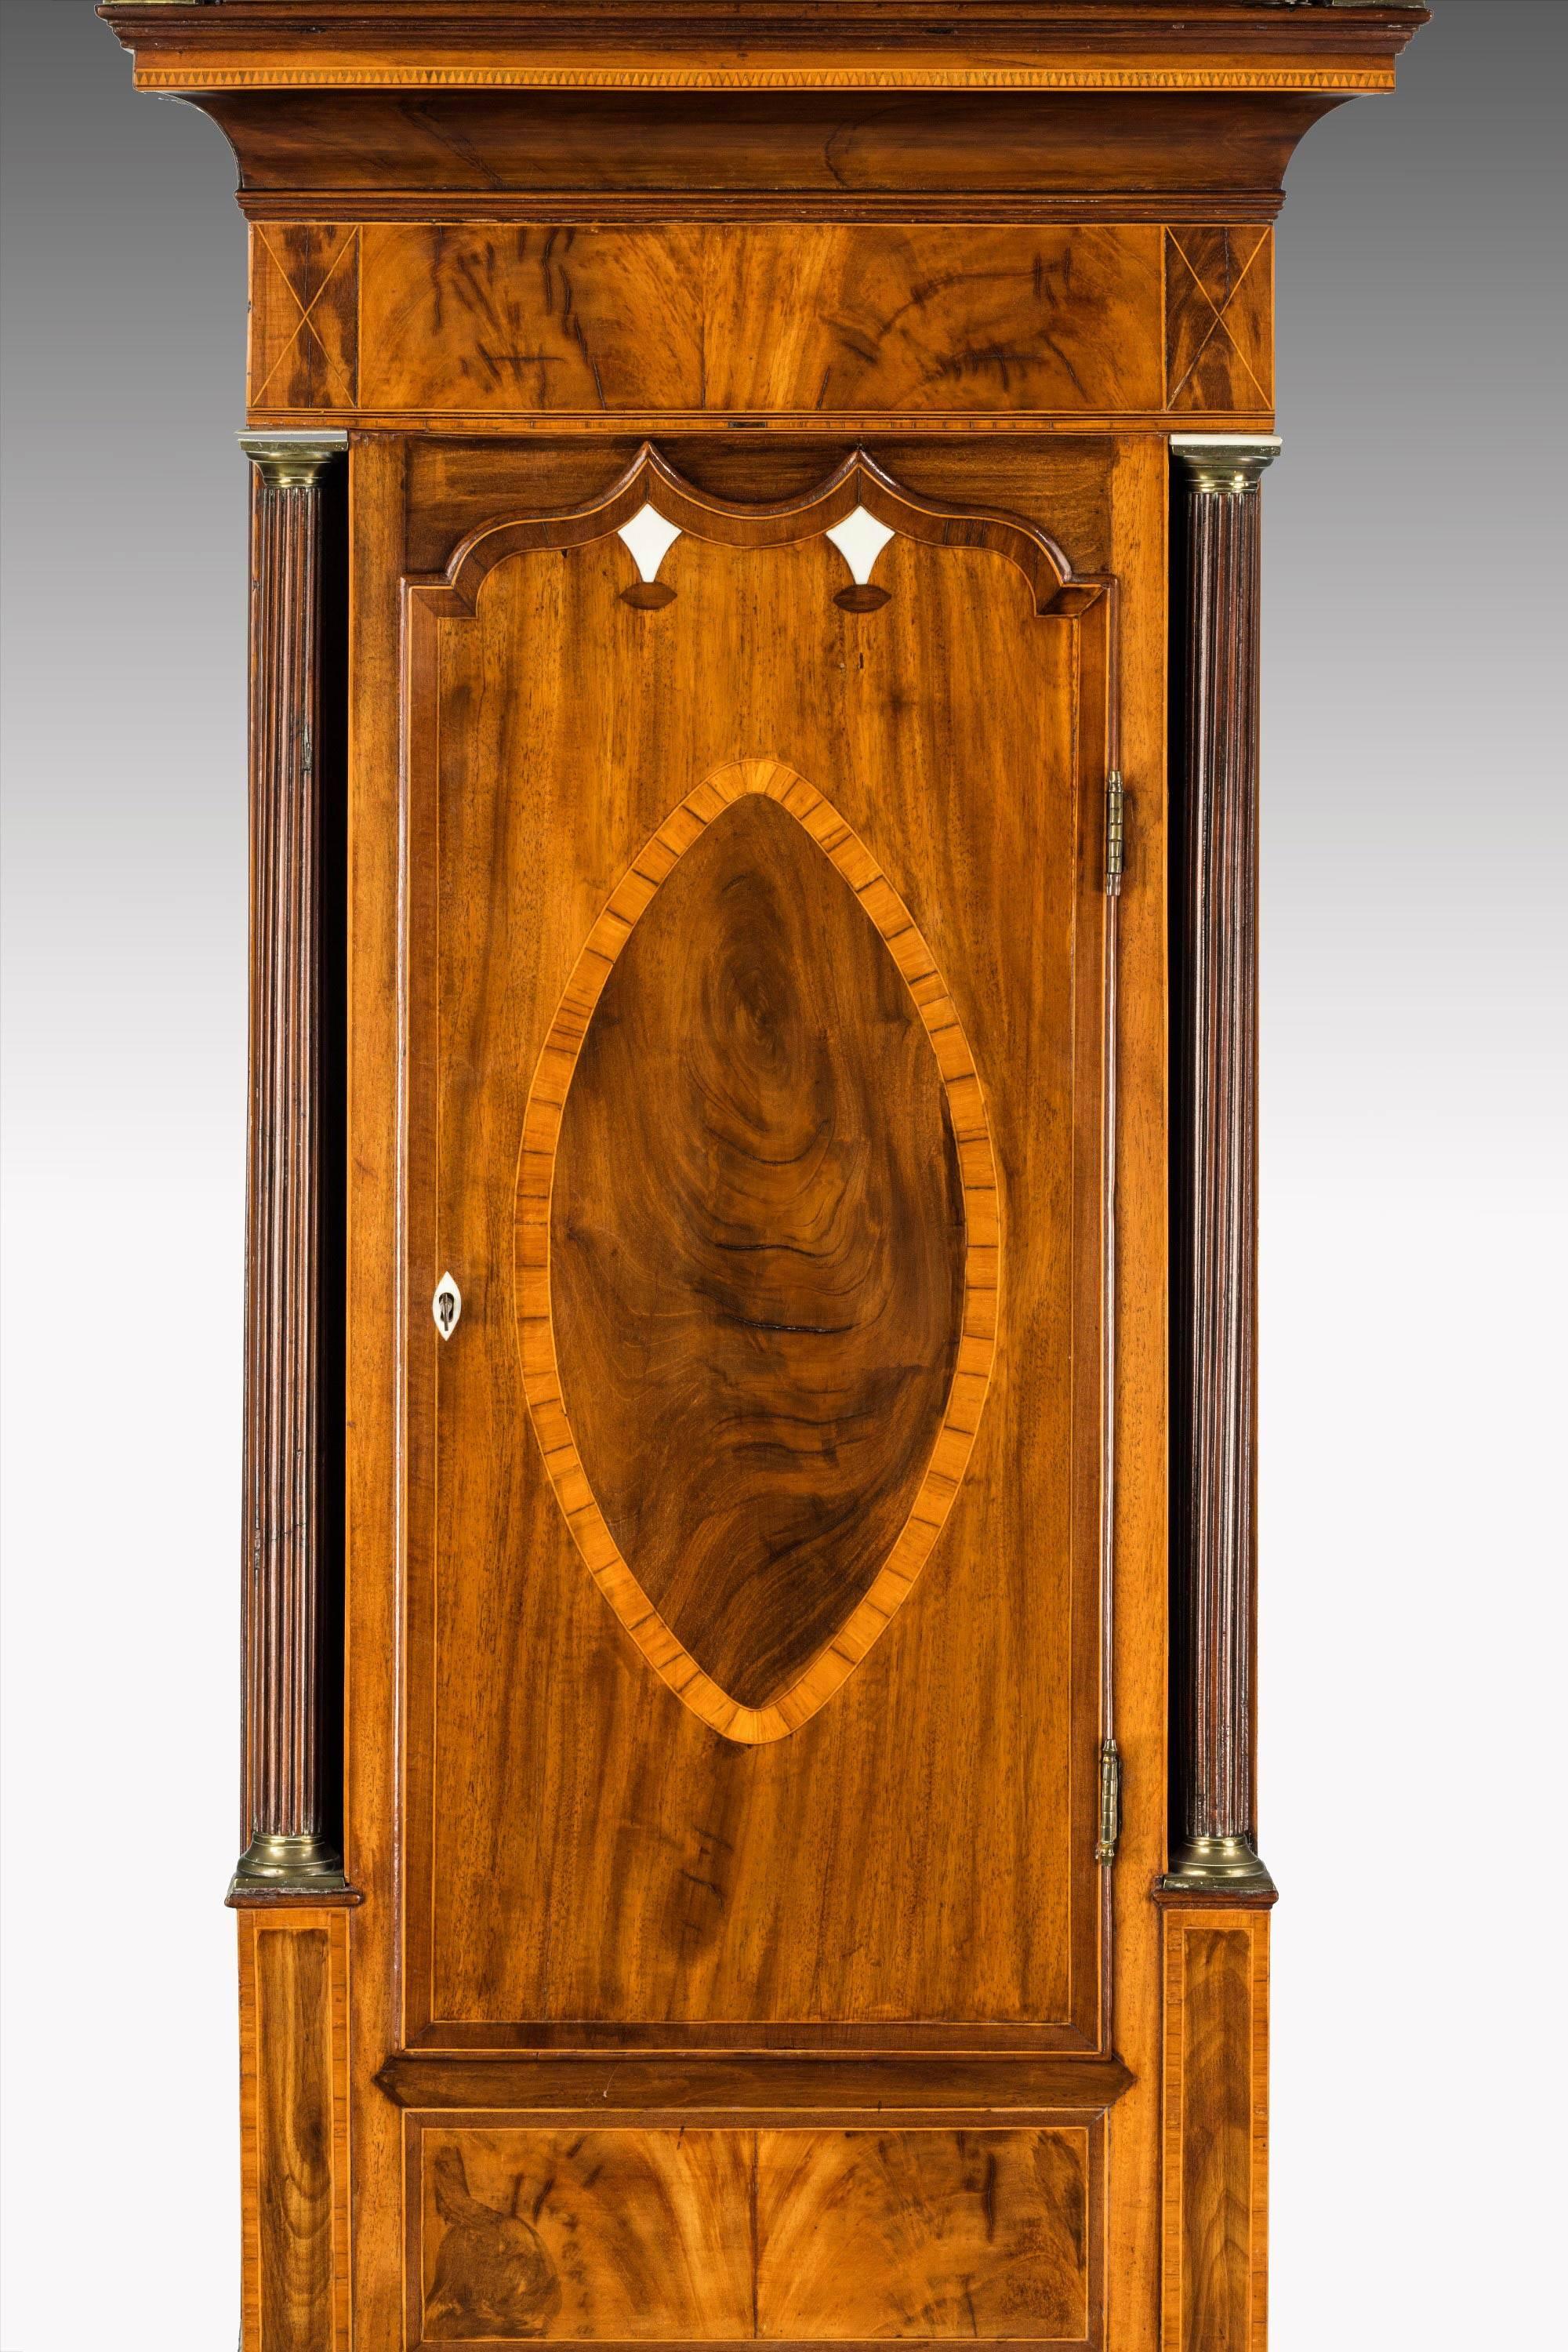 Regency Period Long-Case Clock by James Powell of Worcester 1